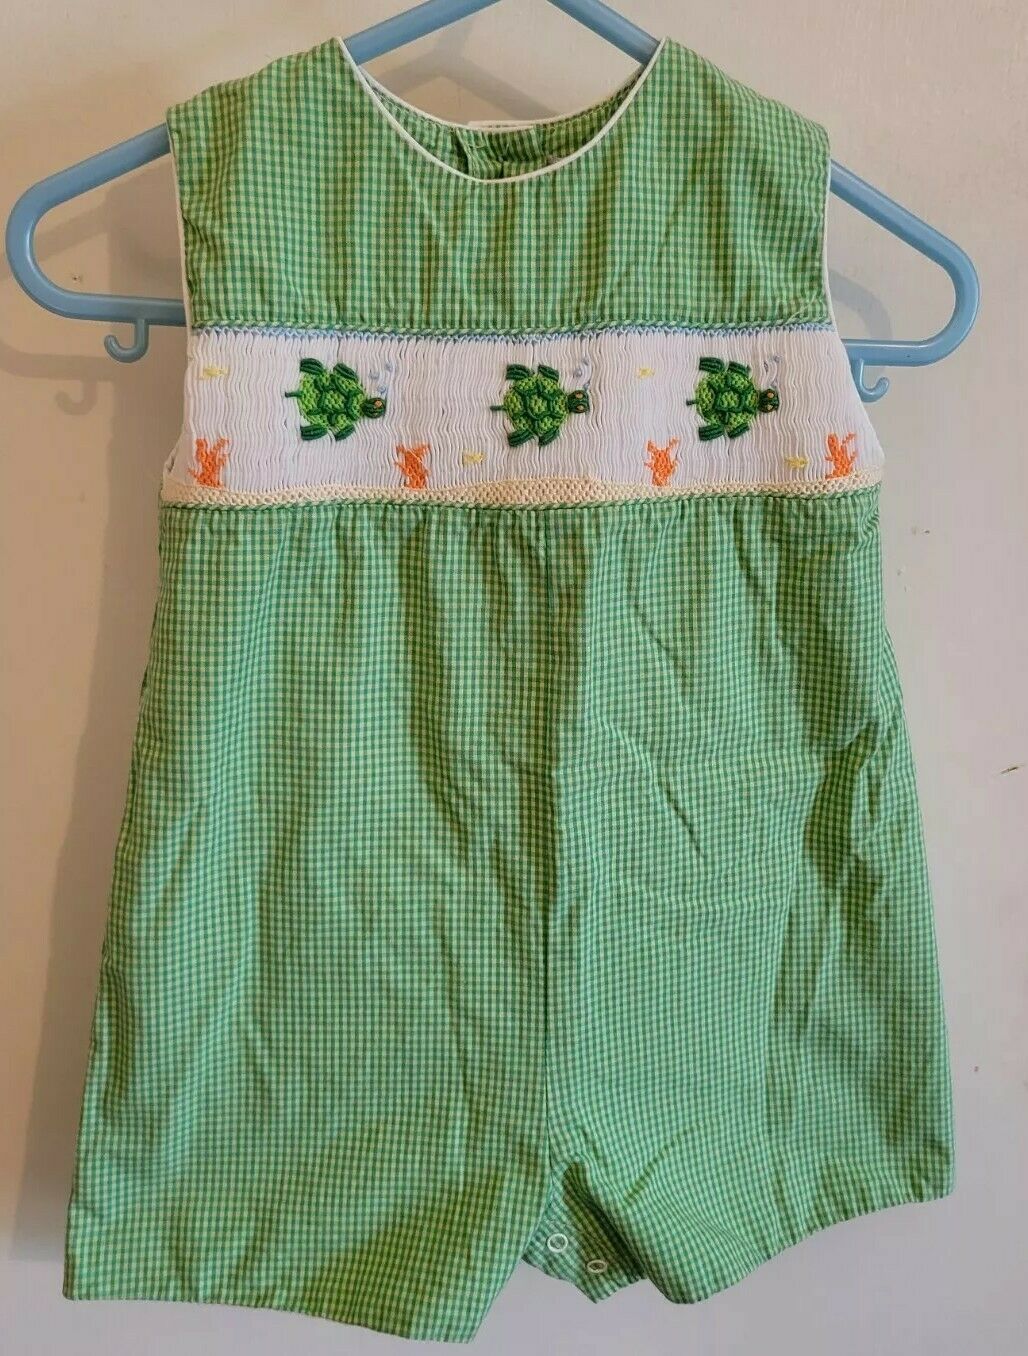 Vintage Petite Ami Baby One Piece Romper Smocked Turtles Size 6months 100%cotton